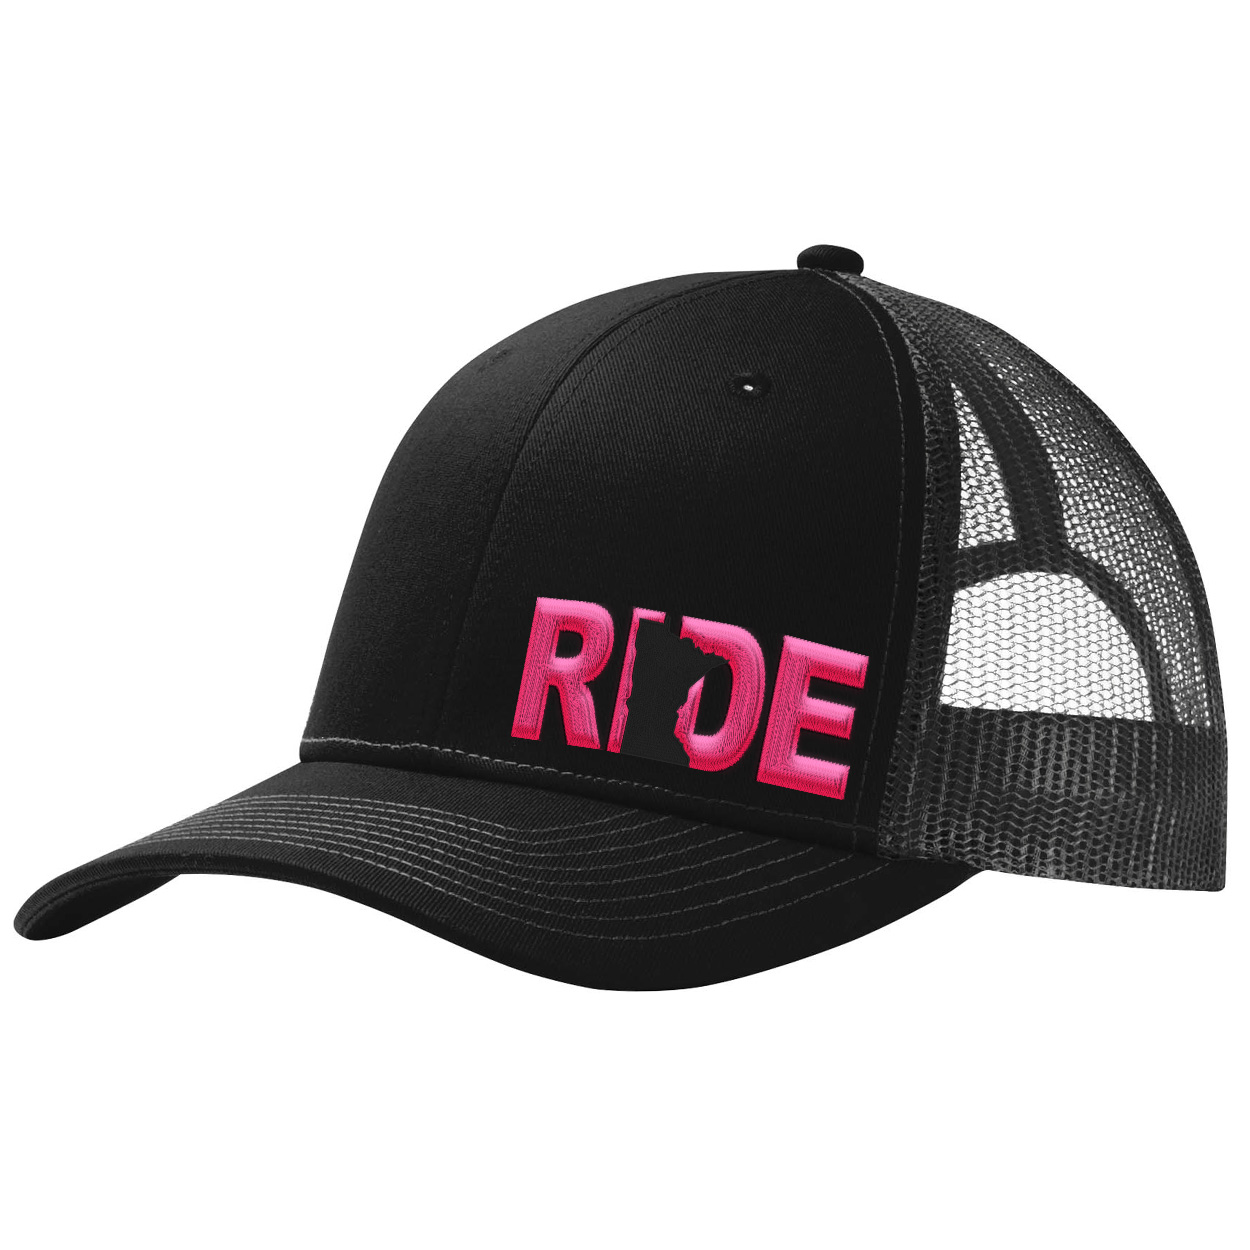 Ride Minnesota Night Out Pro Embroidered Snapback Trucker Hat Black/Pink